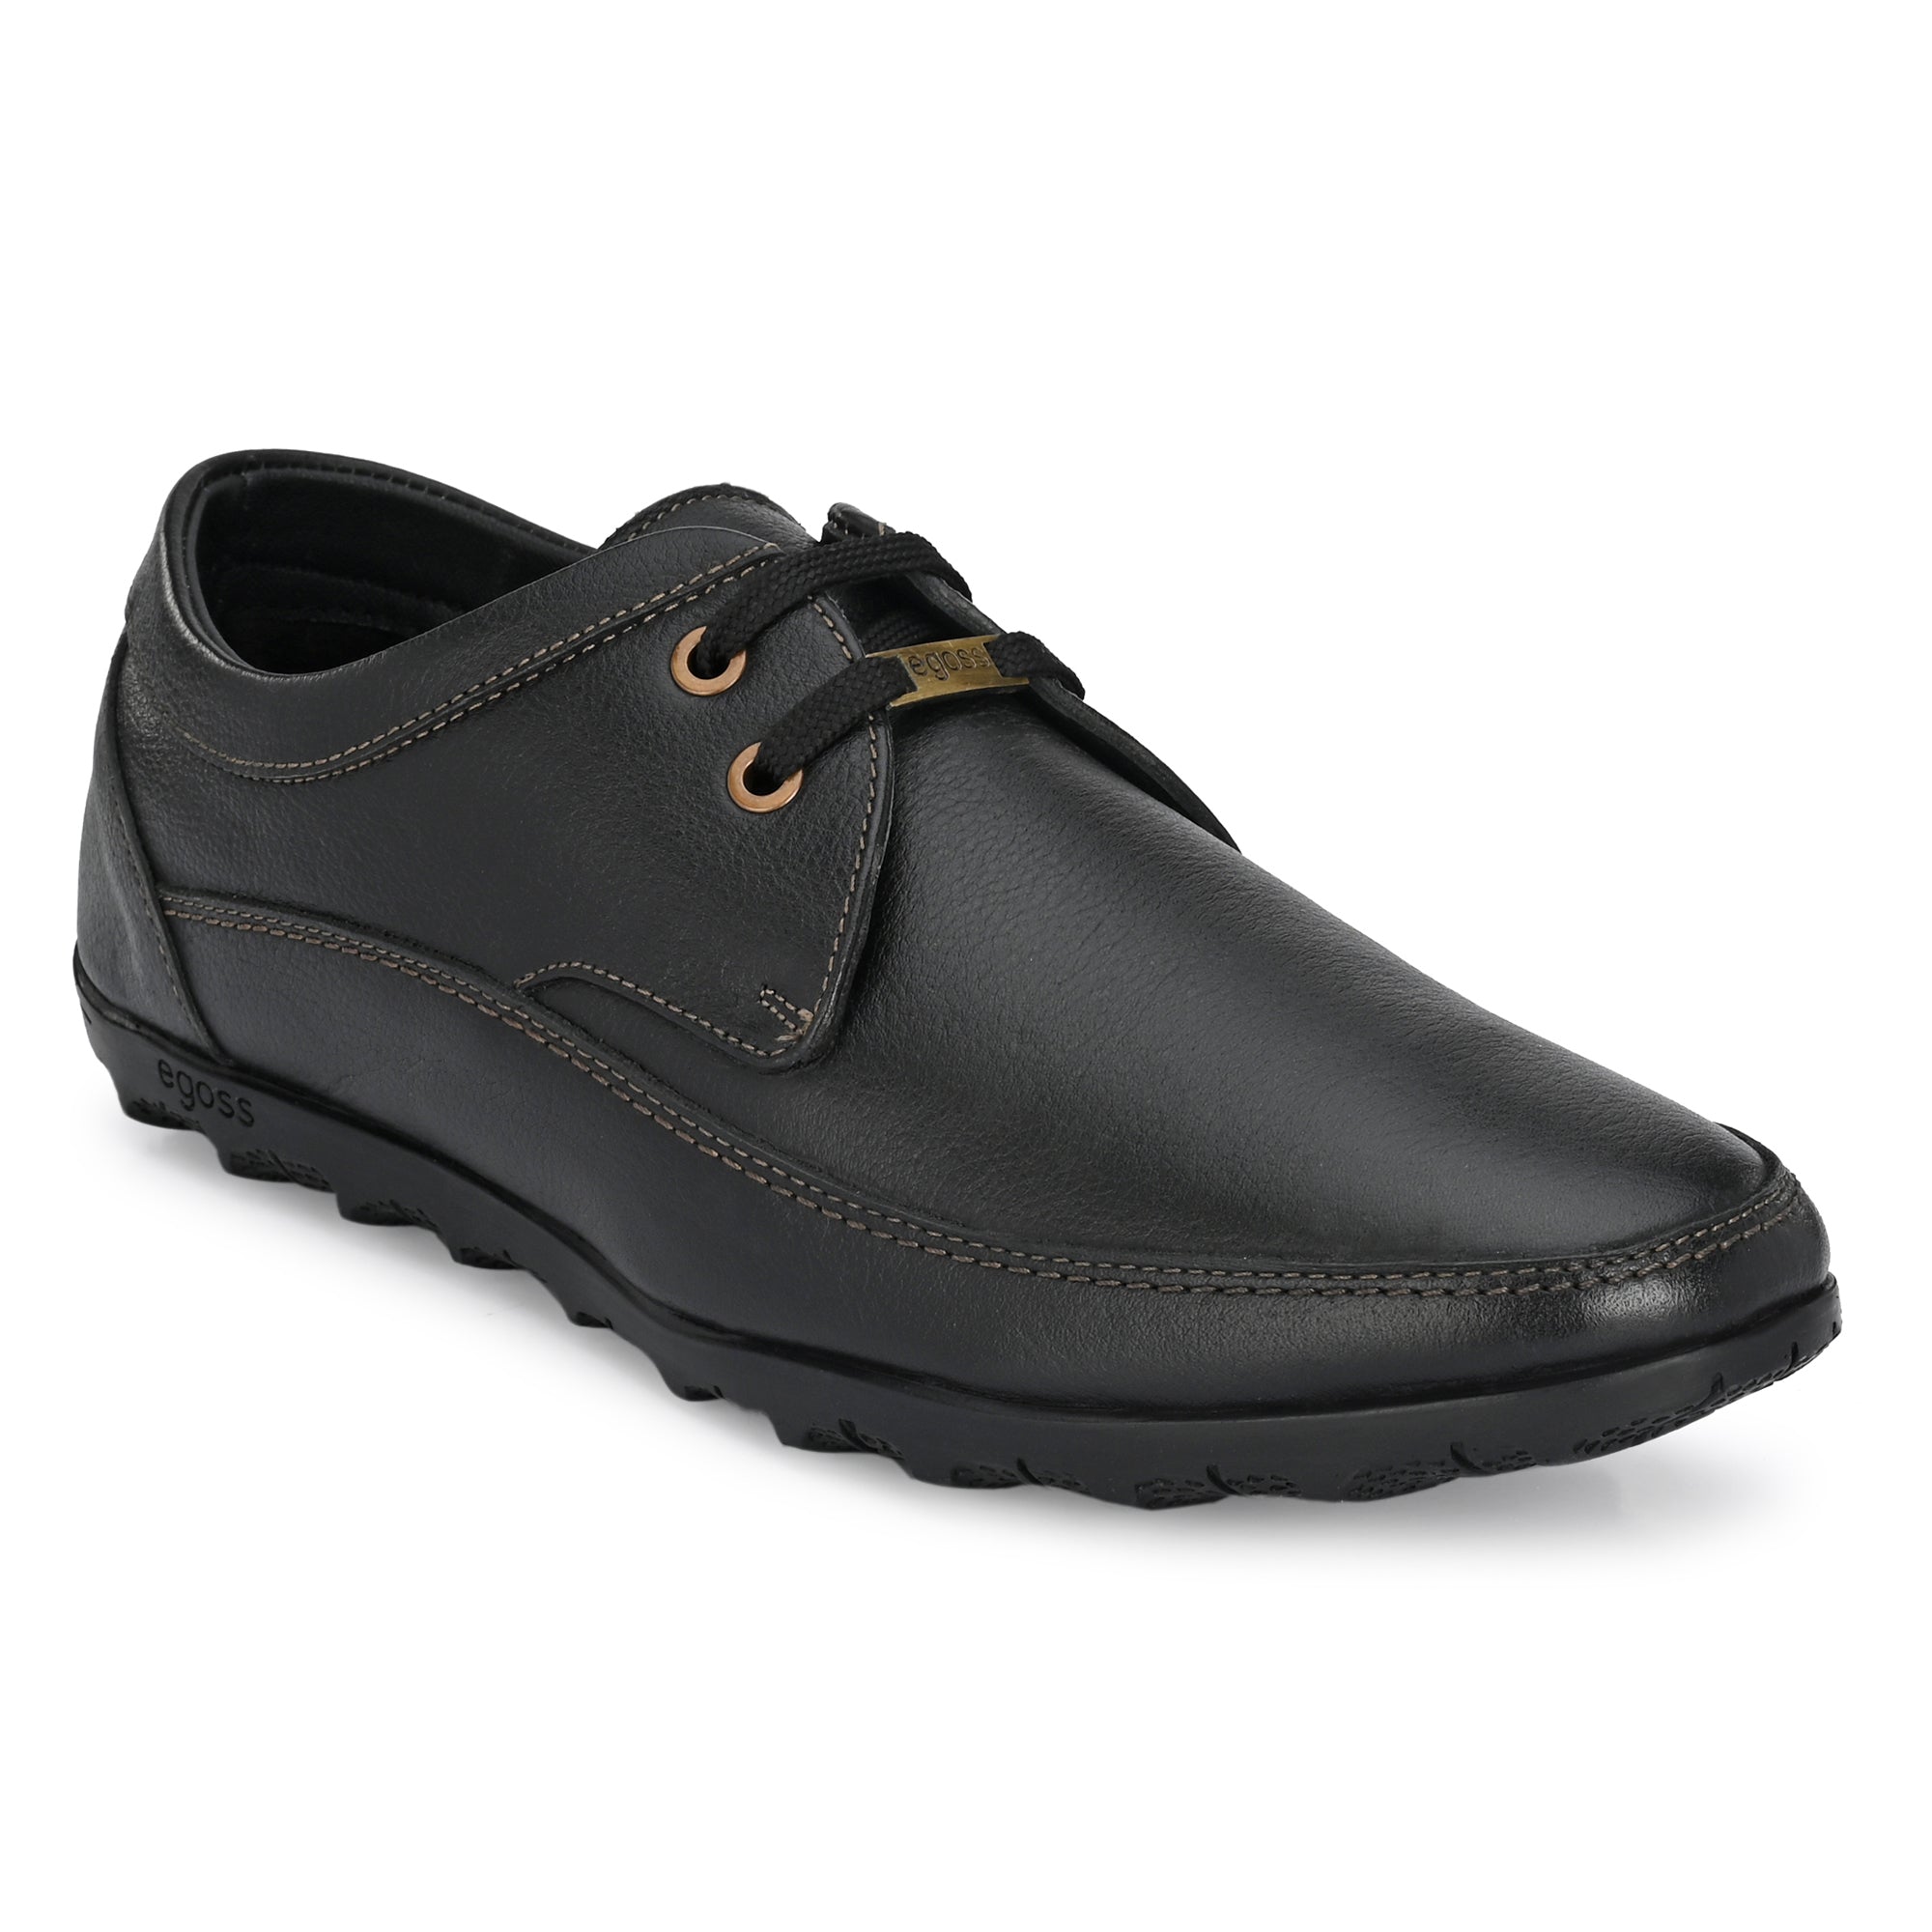 Egoss Casual Lace up Premium Leather Shoes For Men